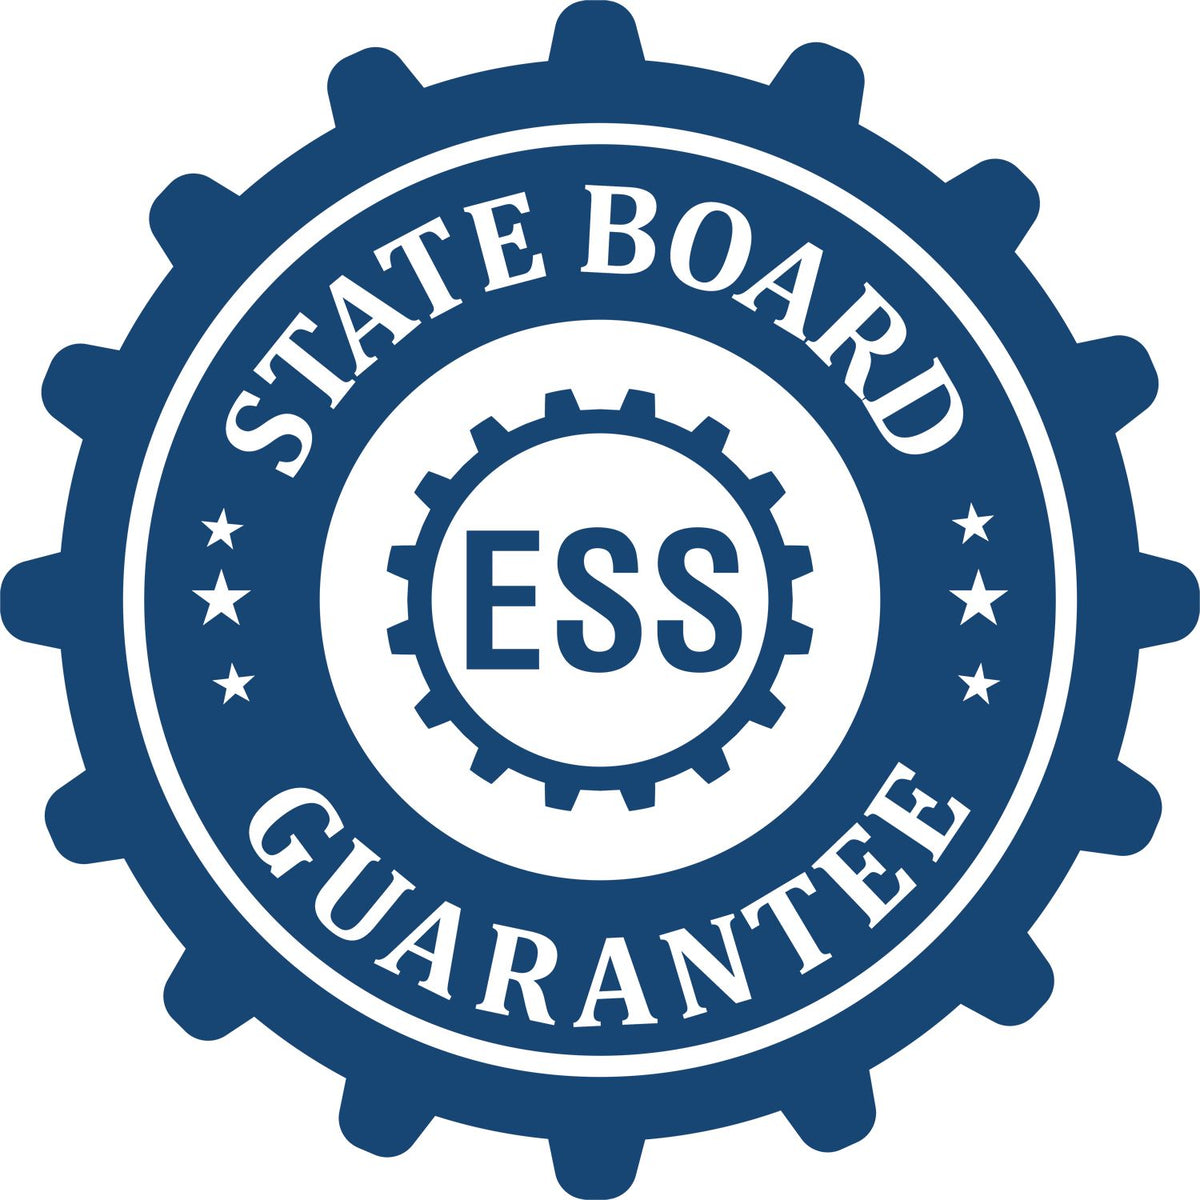 An emblem in a gear shape illustrating a state board guarantee for the Handheld Ohio Professional Geologist Embosser